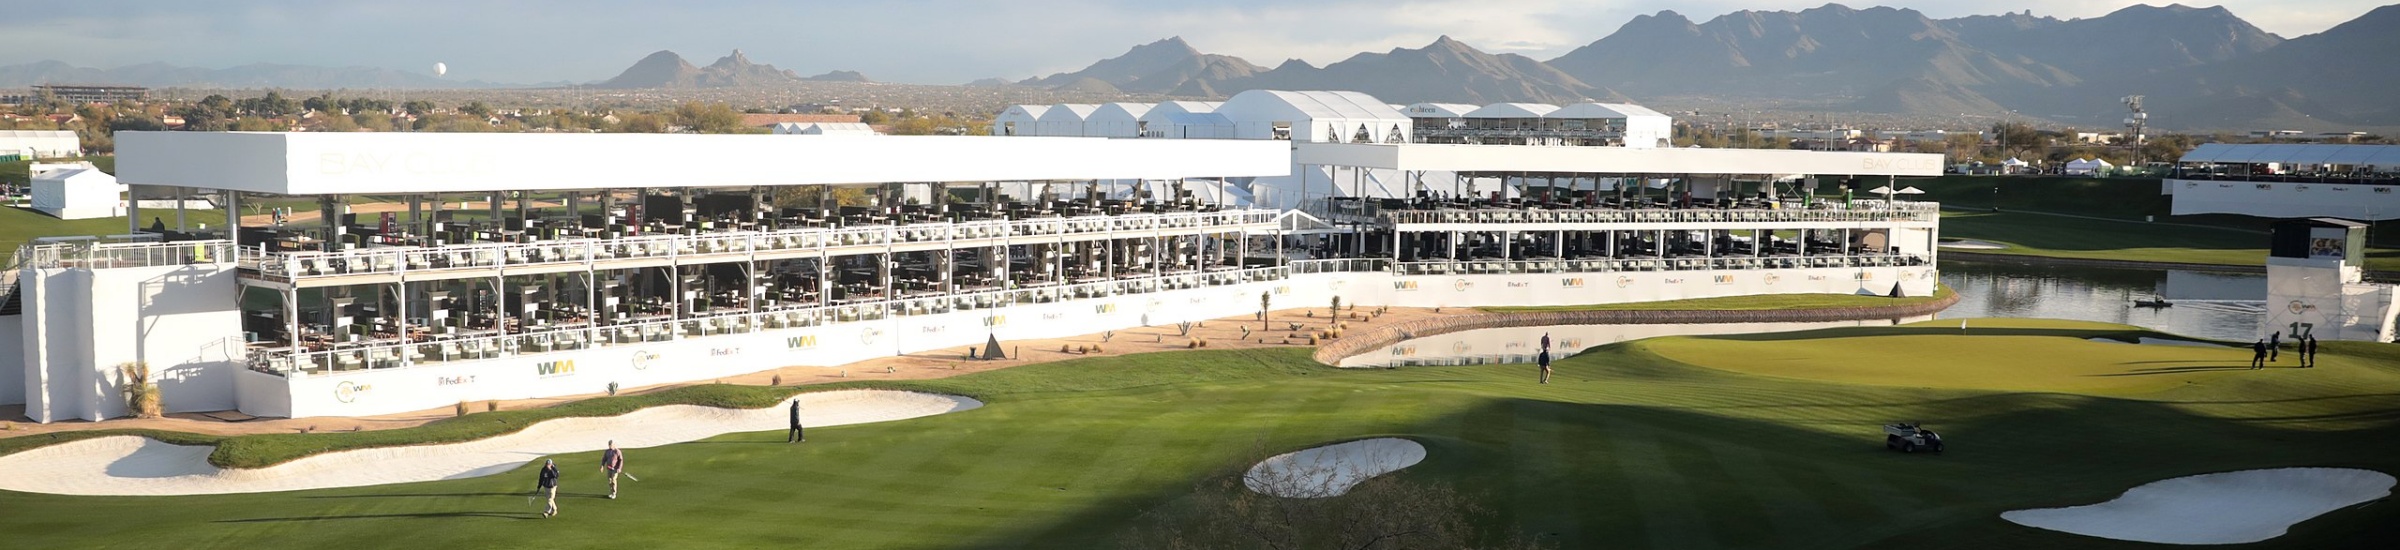 Waste Management Open Seating Guide TPC Scottsdale